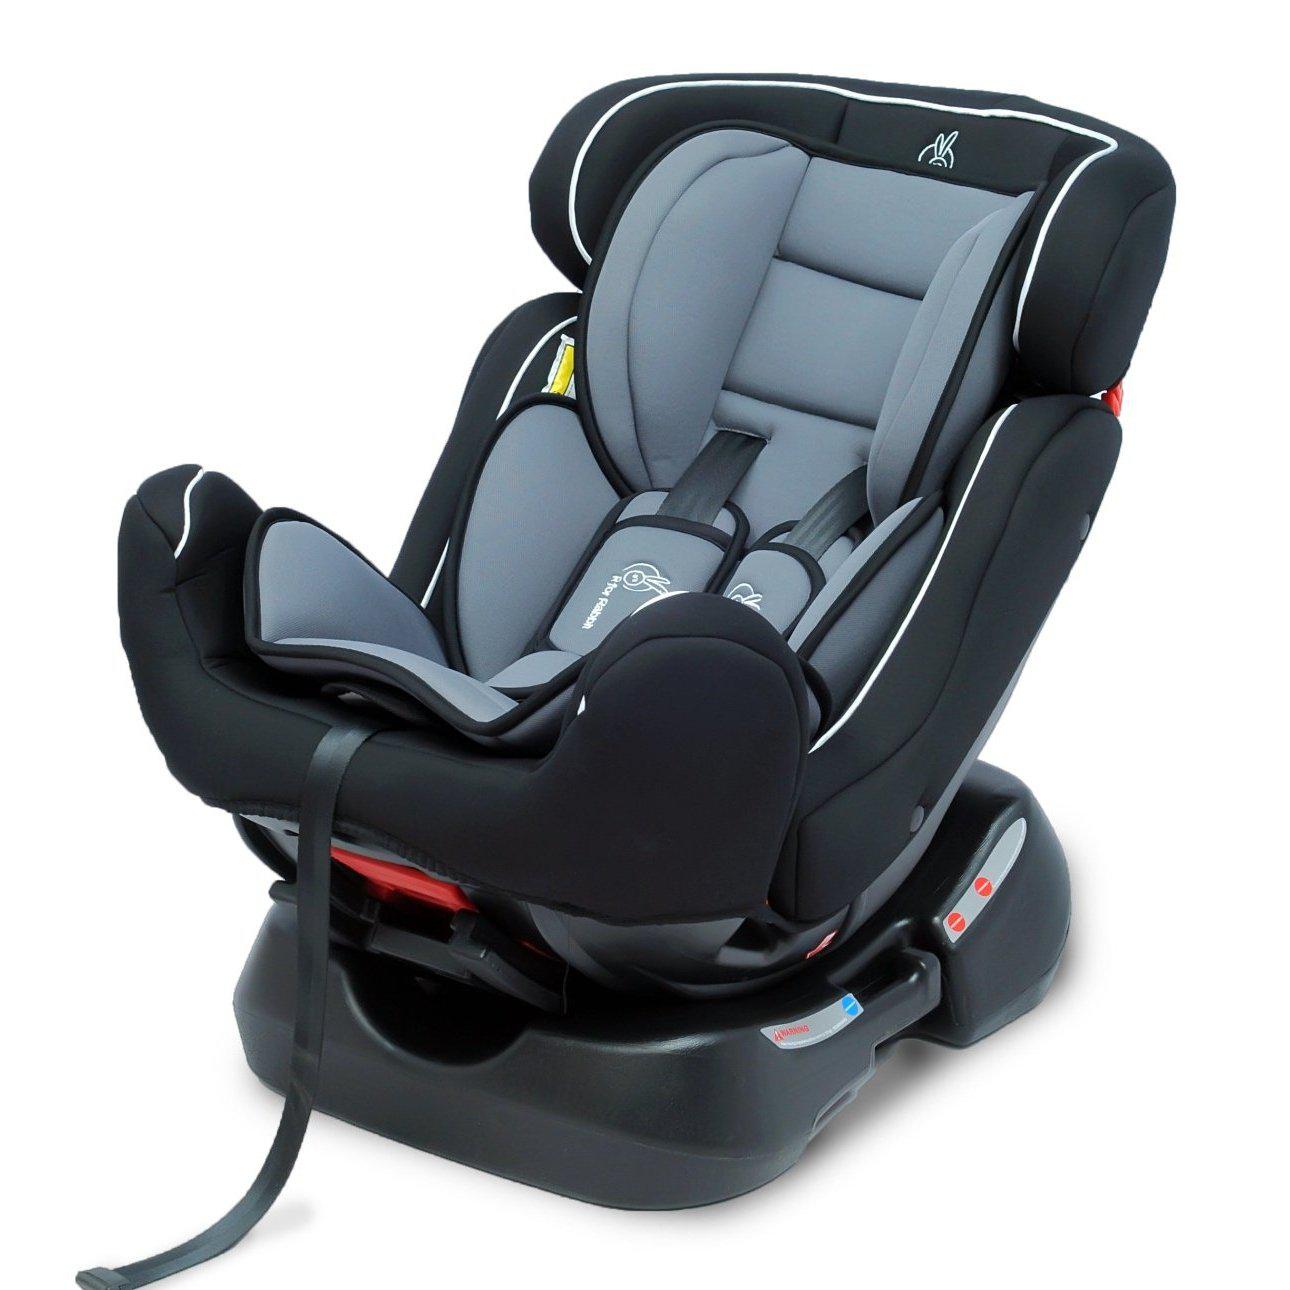 R for Rabbit Jack N Jill Grand - The Innovative Convertible Car Seat for Baby/Kids (from 0-7 Years)